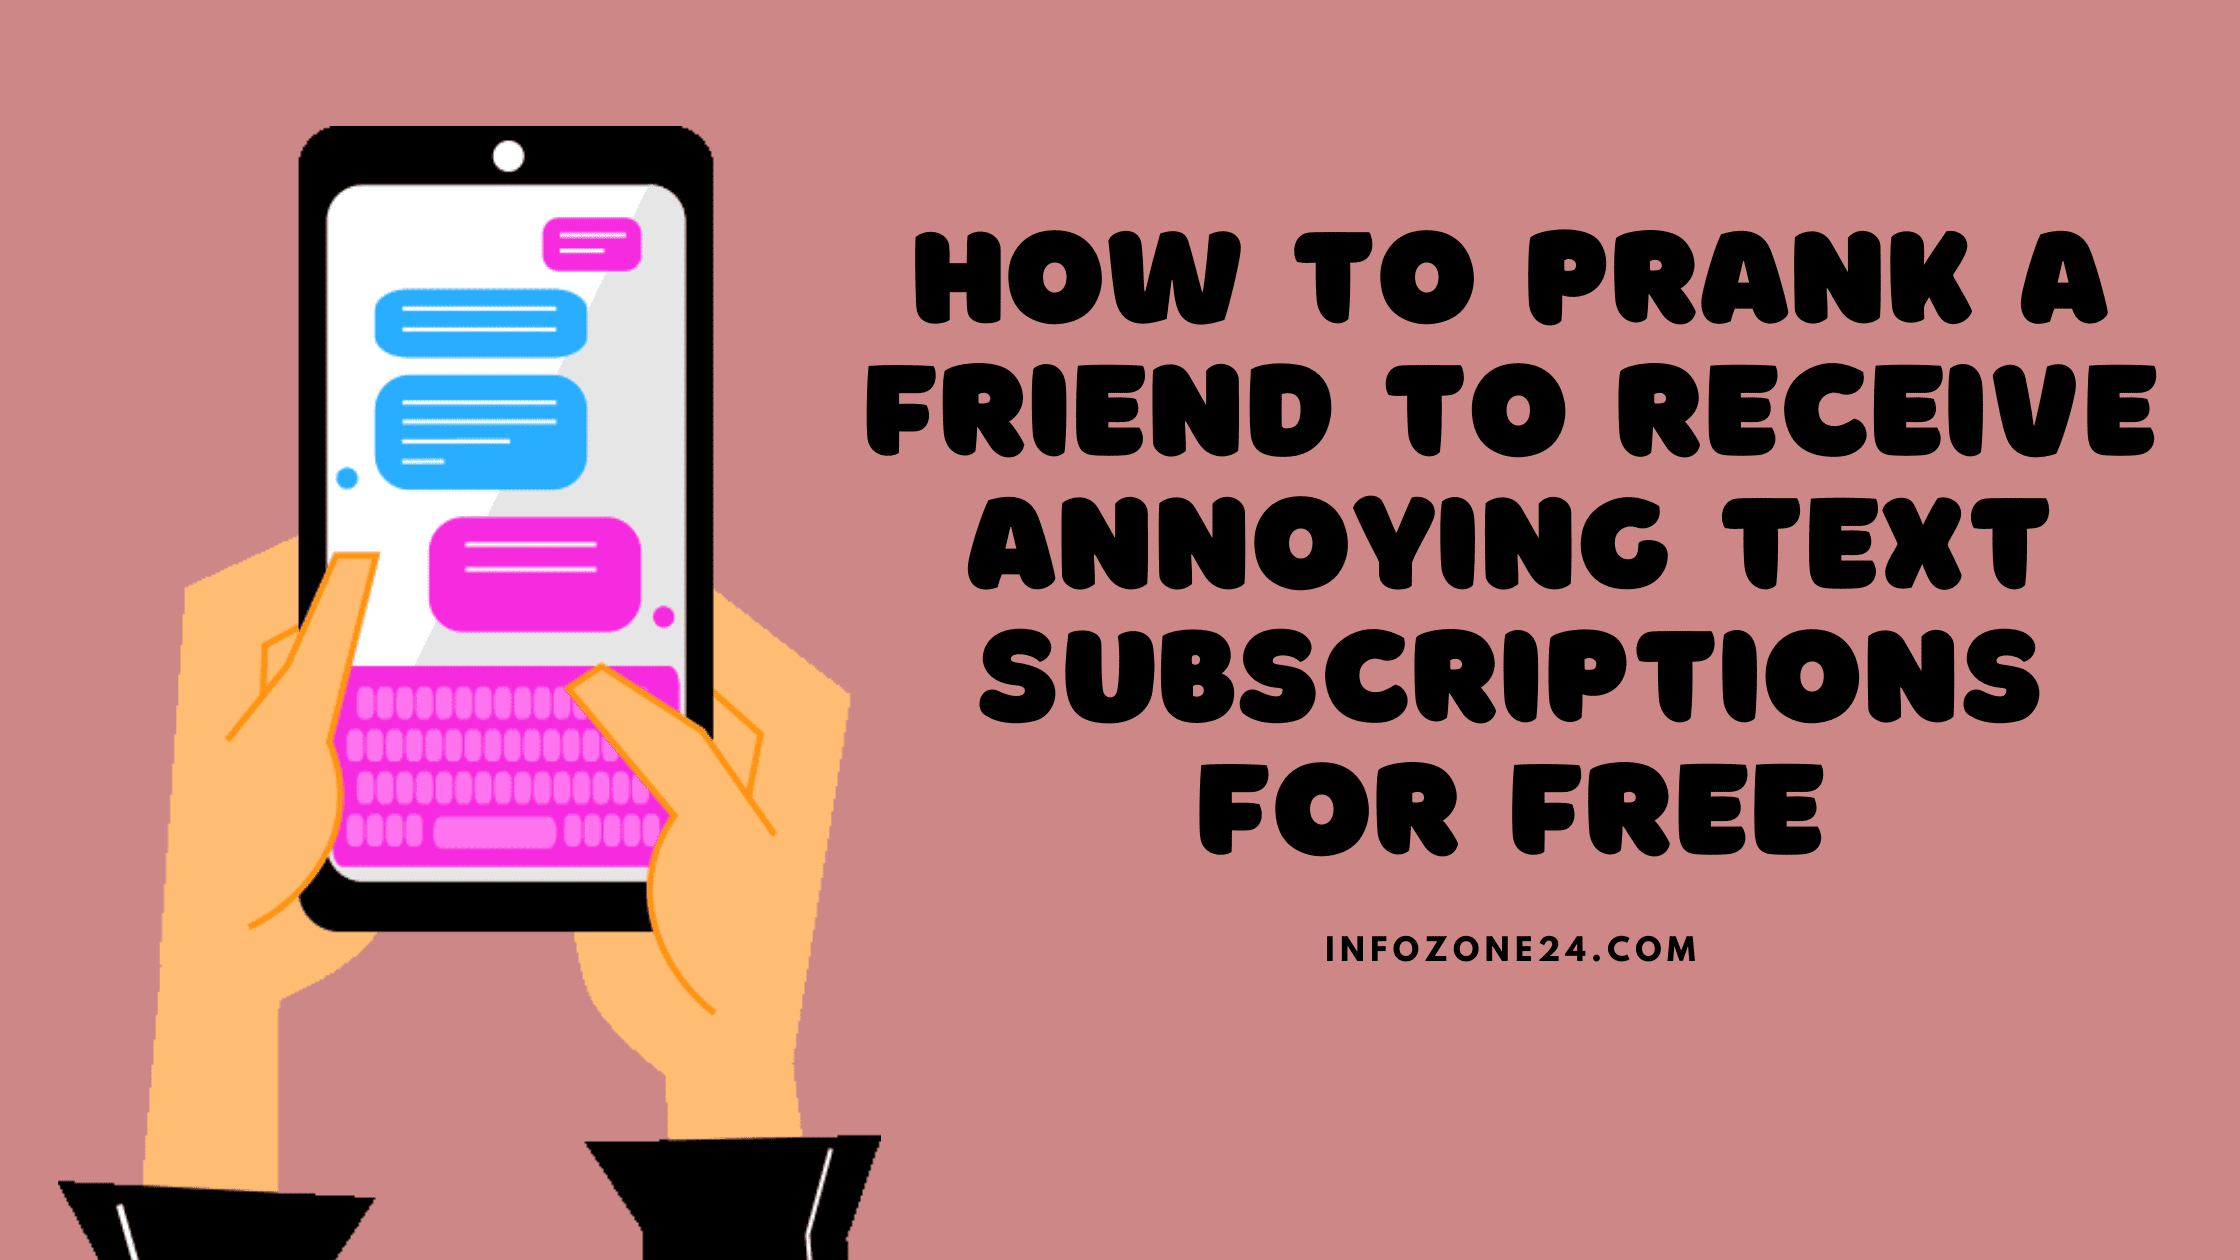 How To Prank a Friend to Receive Annoying Text Subscriptions For Free